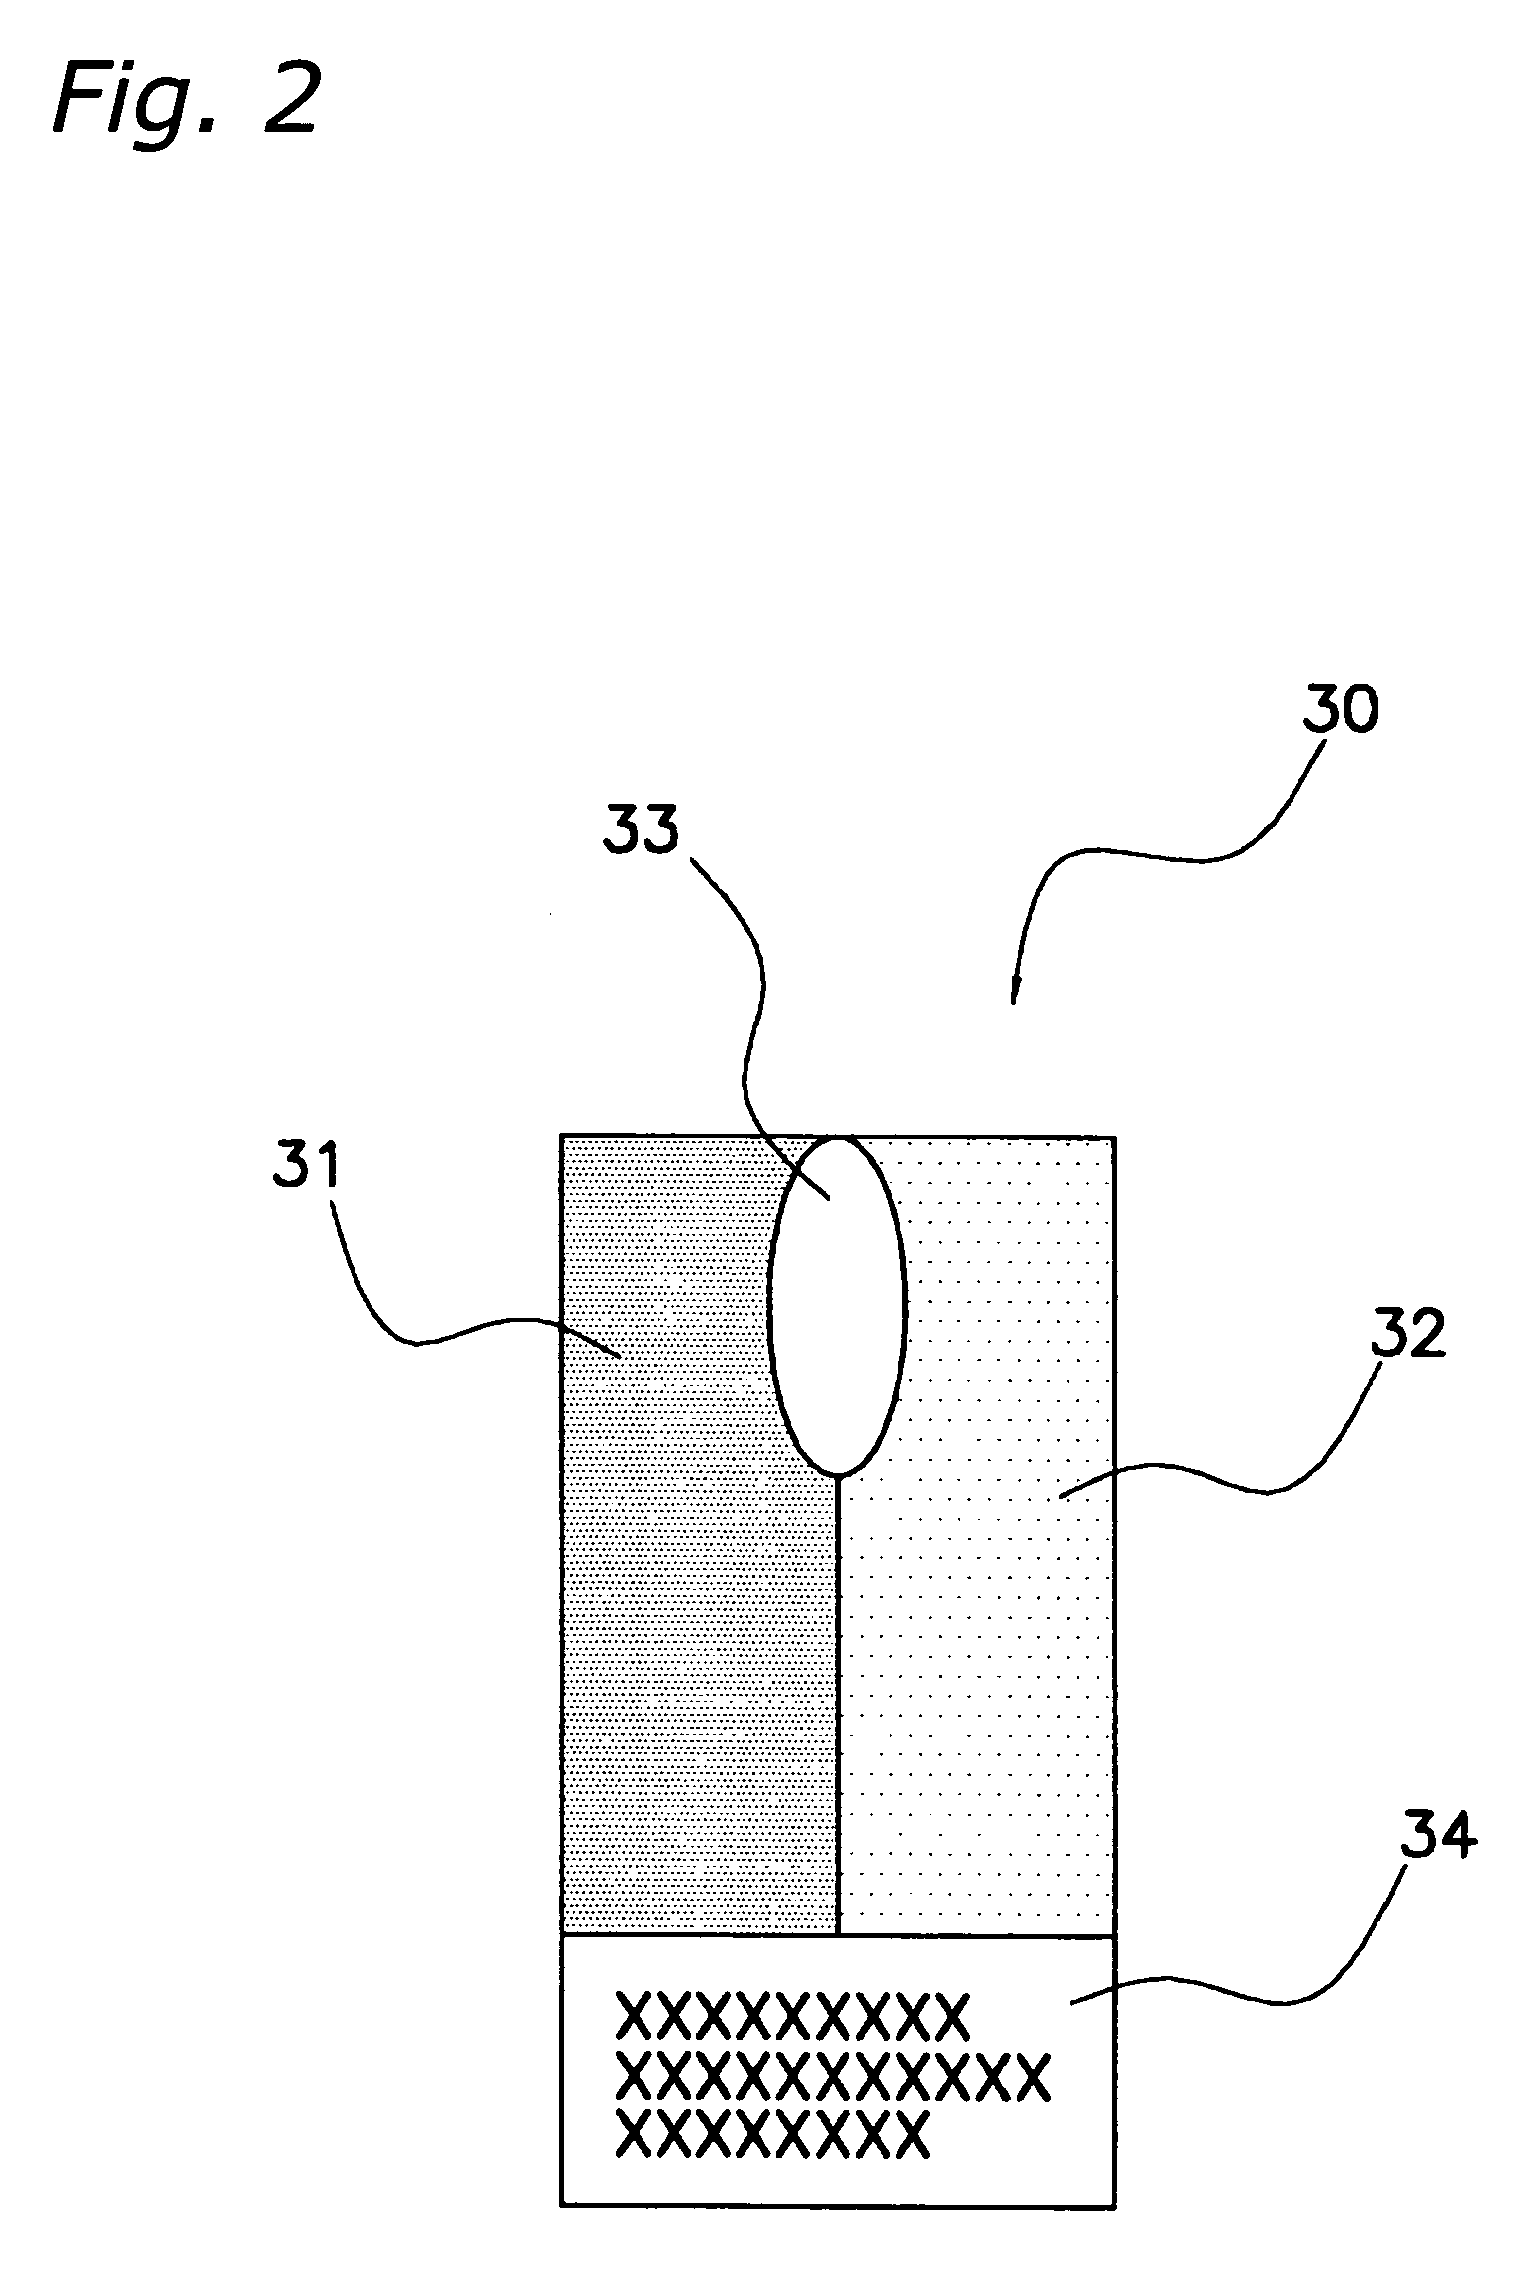 Method for determining reusability of refrigerant using equipment or refrigerant lines, and reusability check tool for refrigerant using equipment or refrigerant lines